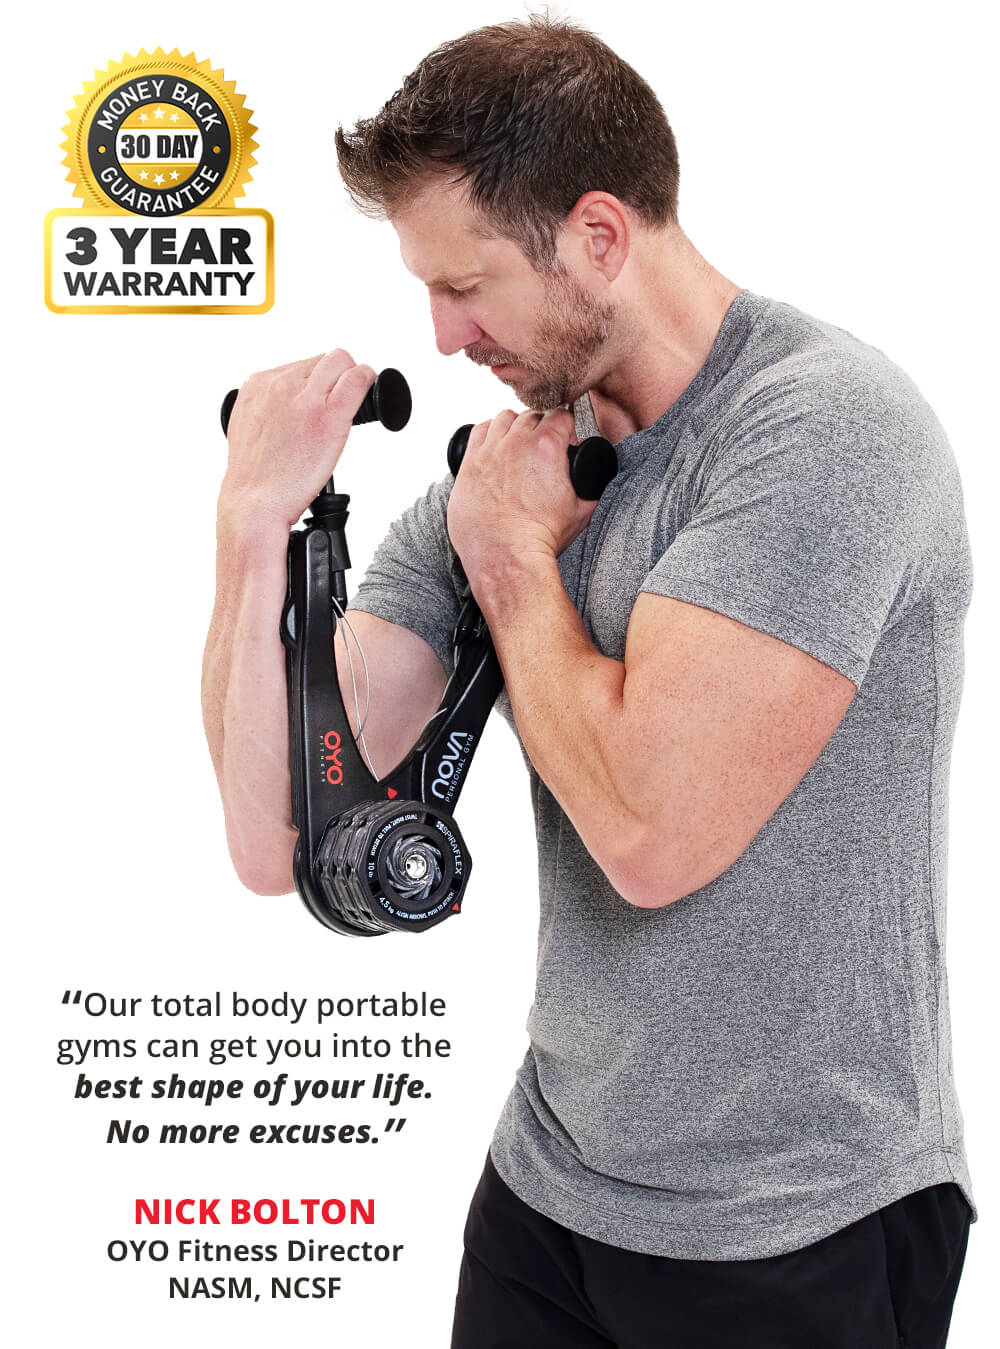 Our total body portable gym can get you into the best shape of your life. No more excuses!